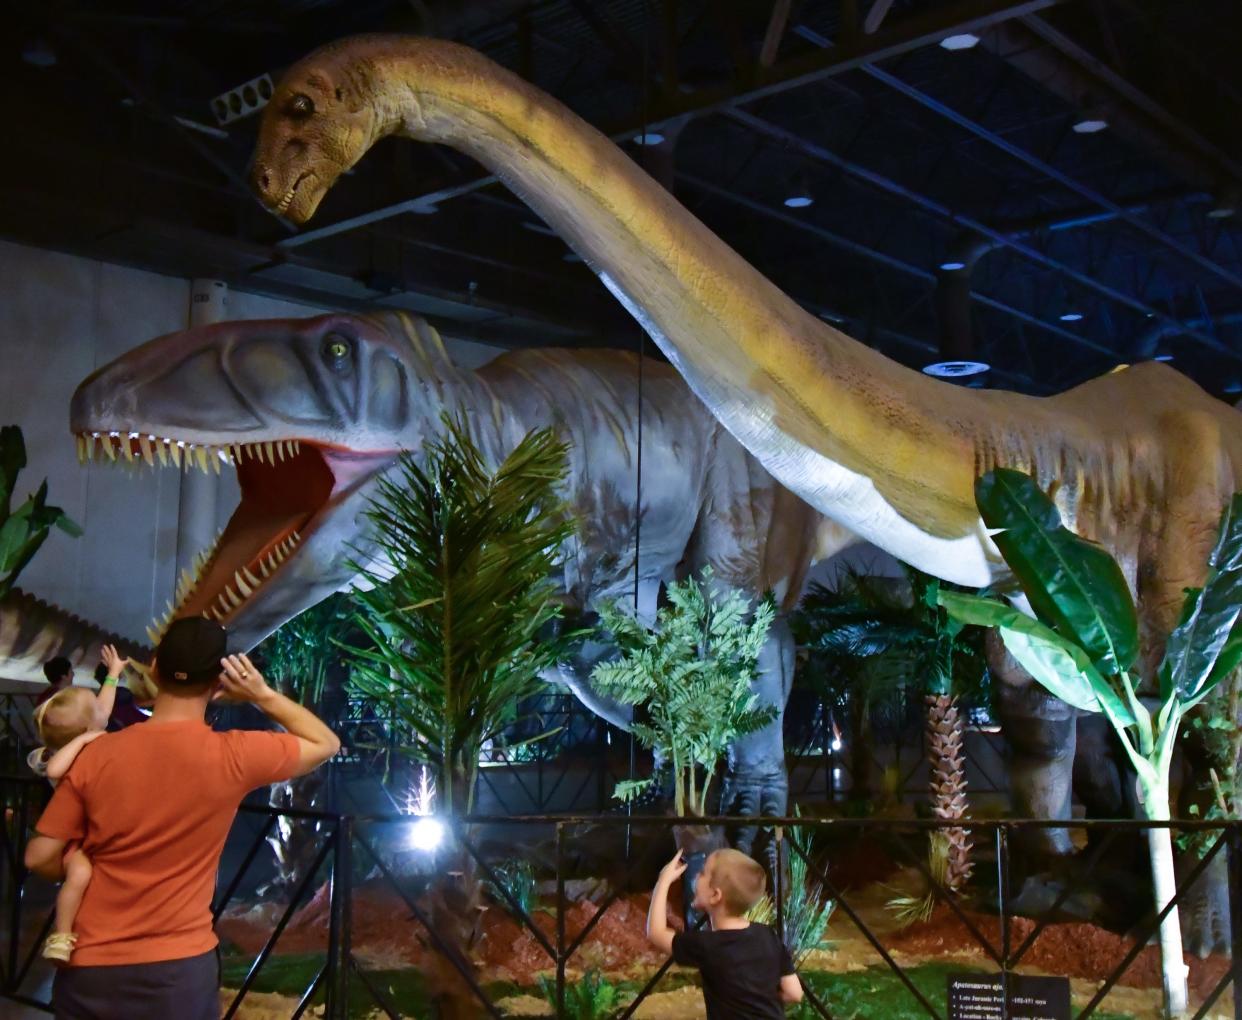 More than 100 life-size animatronic dinosaurs will be on display this weekend for Jurassic Quest at the Ohio Expo Center.